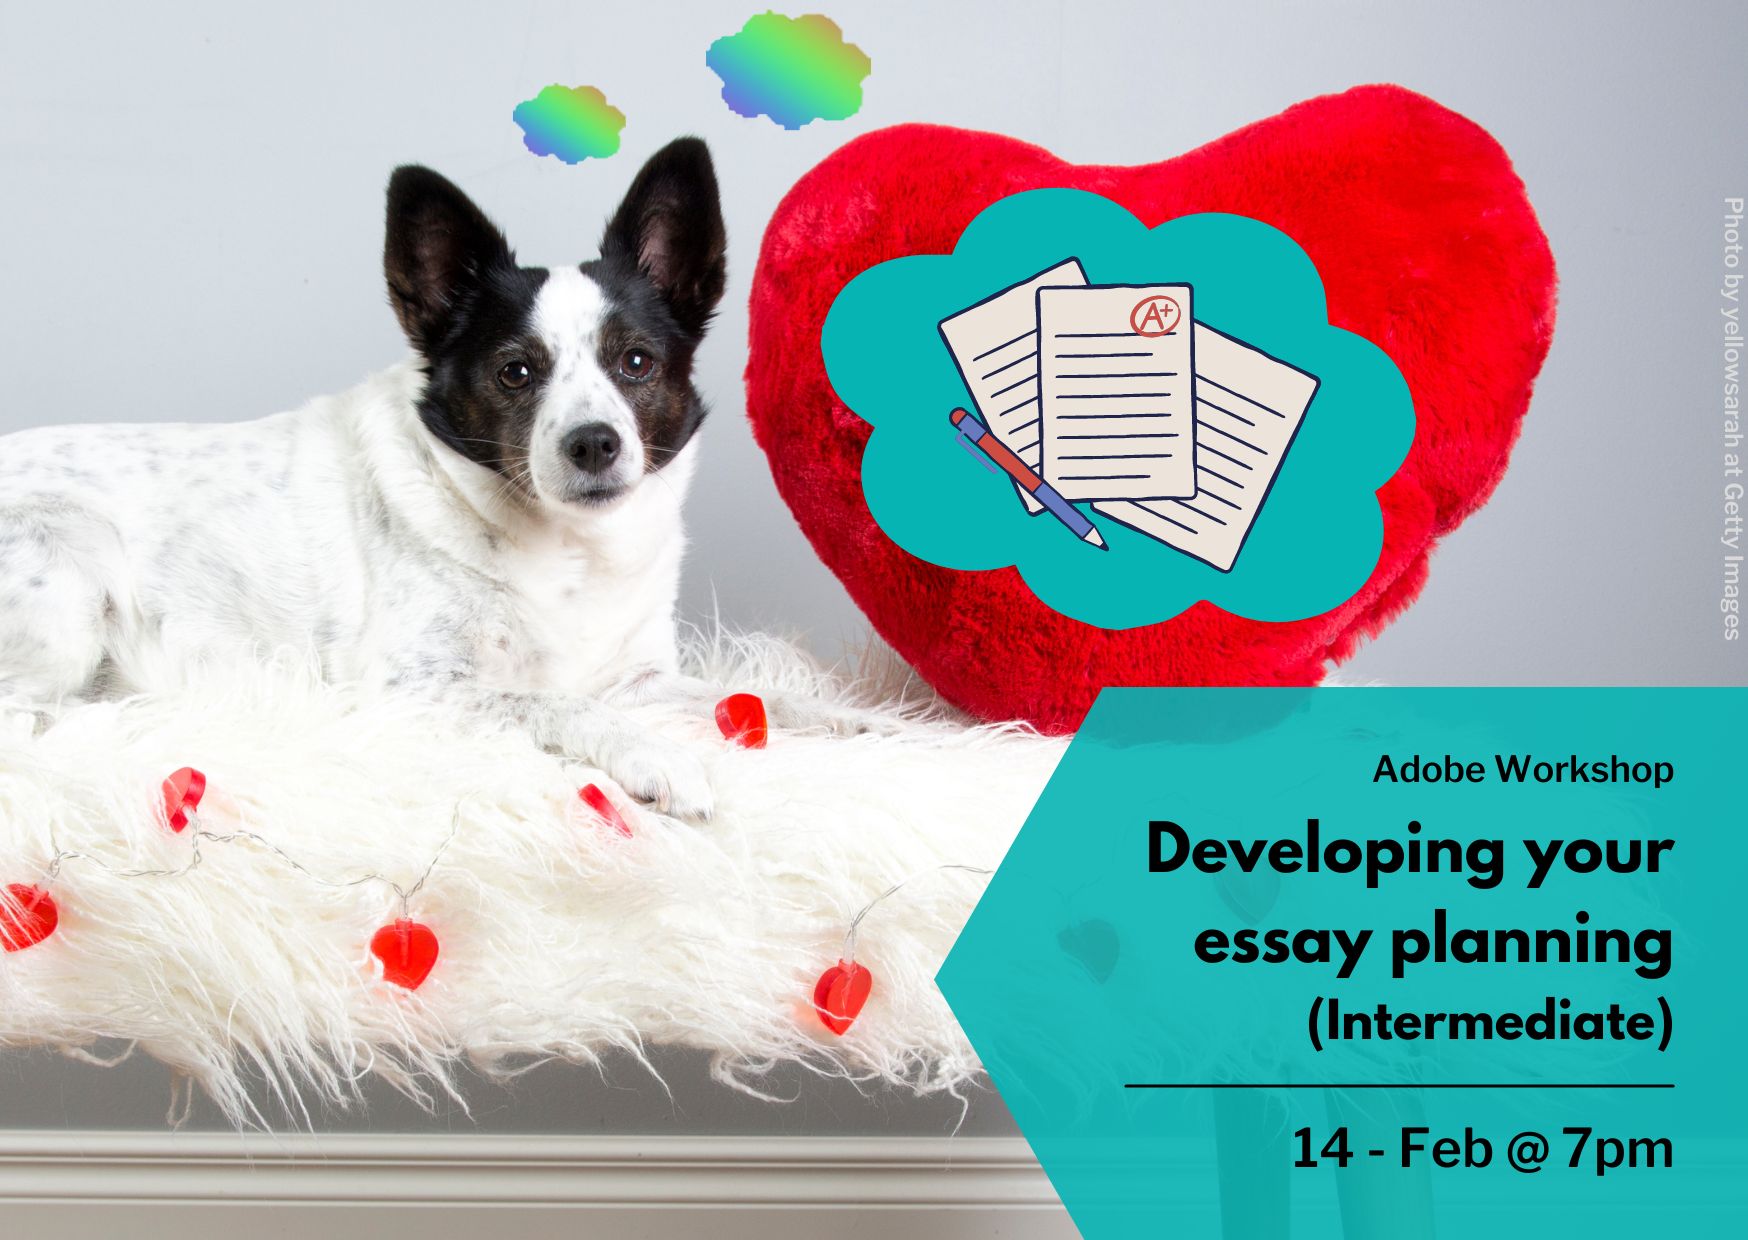 Corgi dog sat on a fluffy bench dreaming of essays in a thought bubble